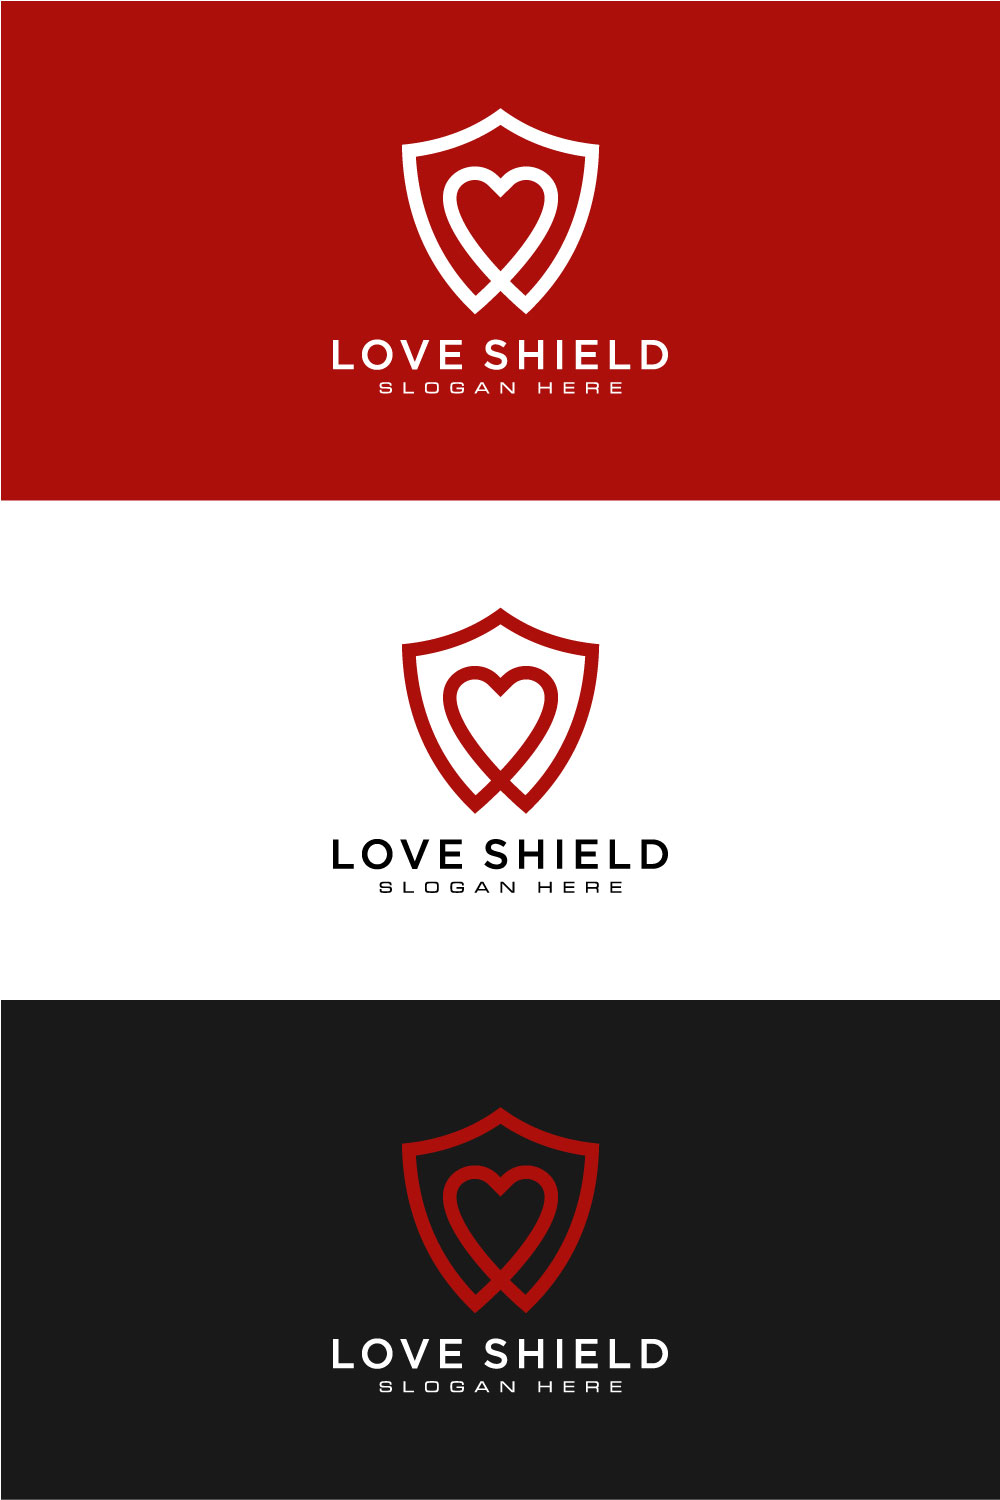 Shield And Love Logo Template Line Style Pinterest Image.